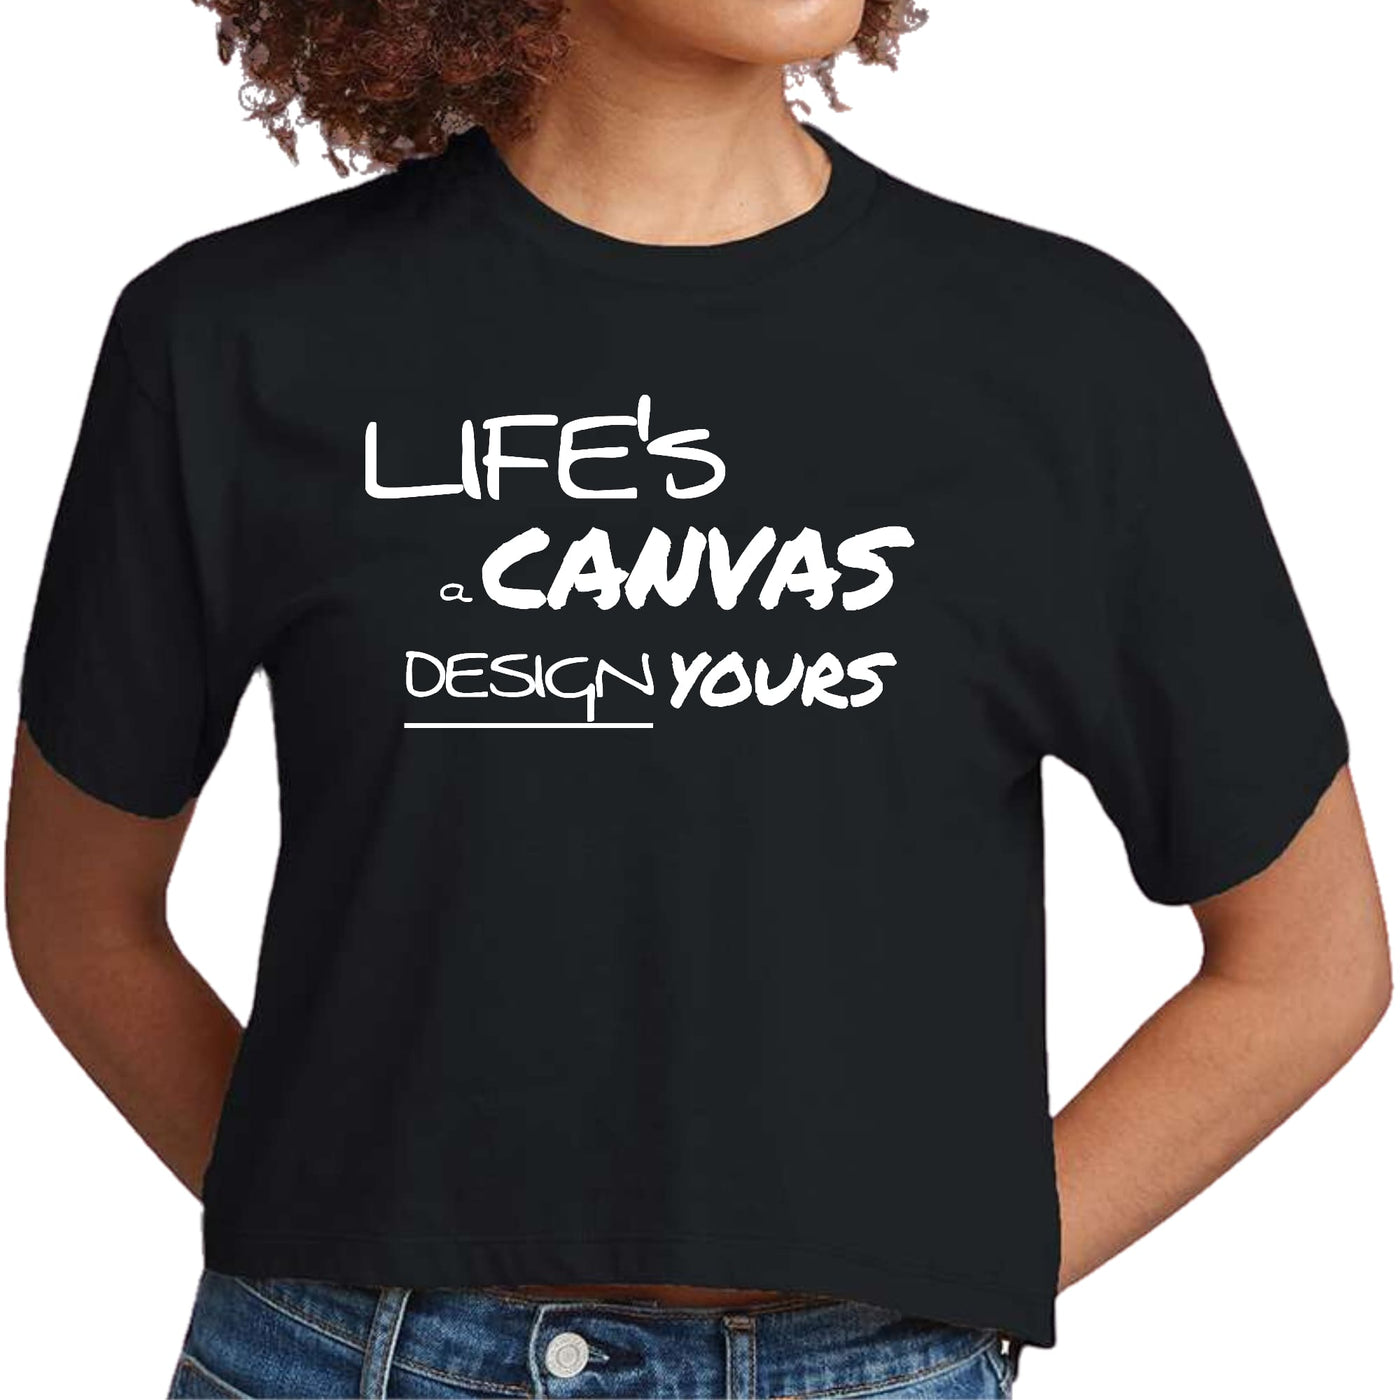 Womens Cropped Graphic T-shirt Life’s a Canvas Design Yours - Womens